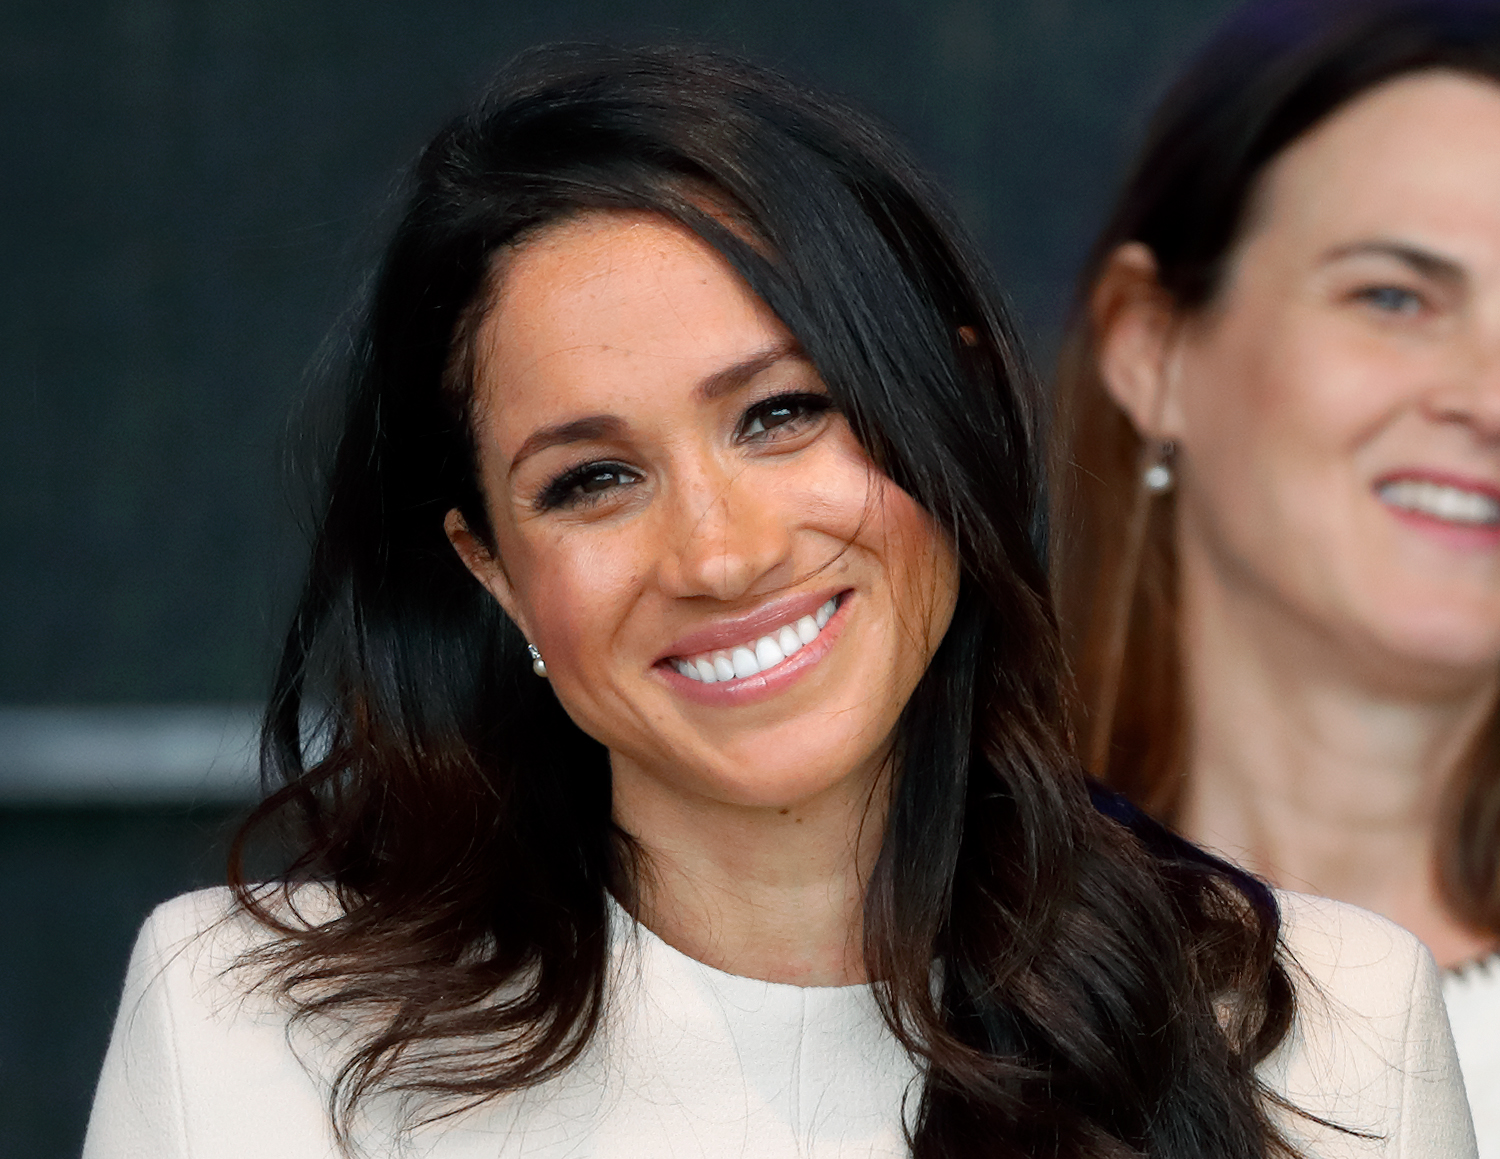 Photo of Meghan Markle from the shoulders up with her hair down and smiling for a photo